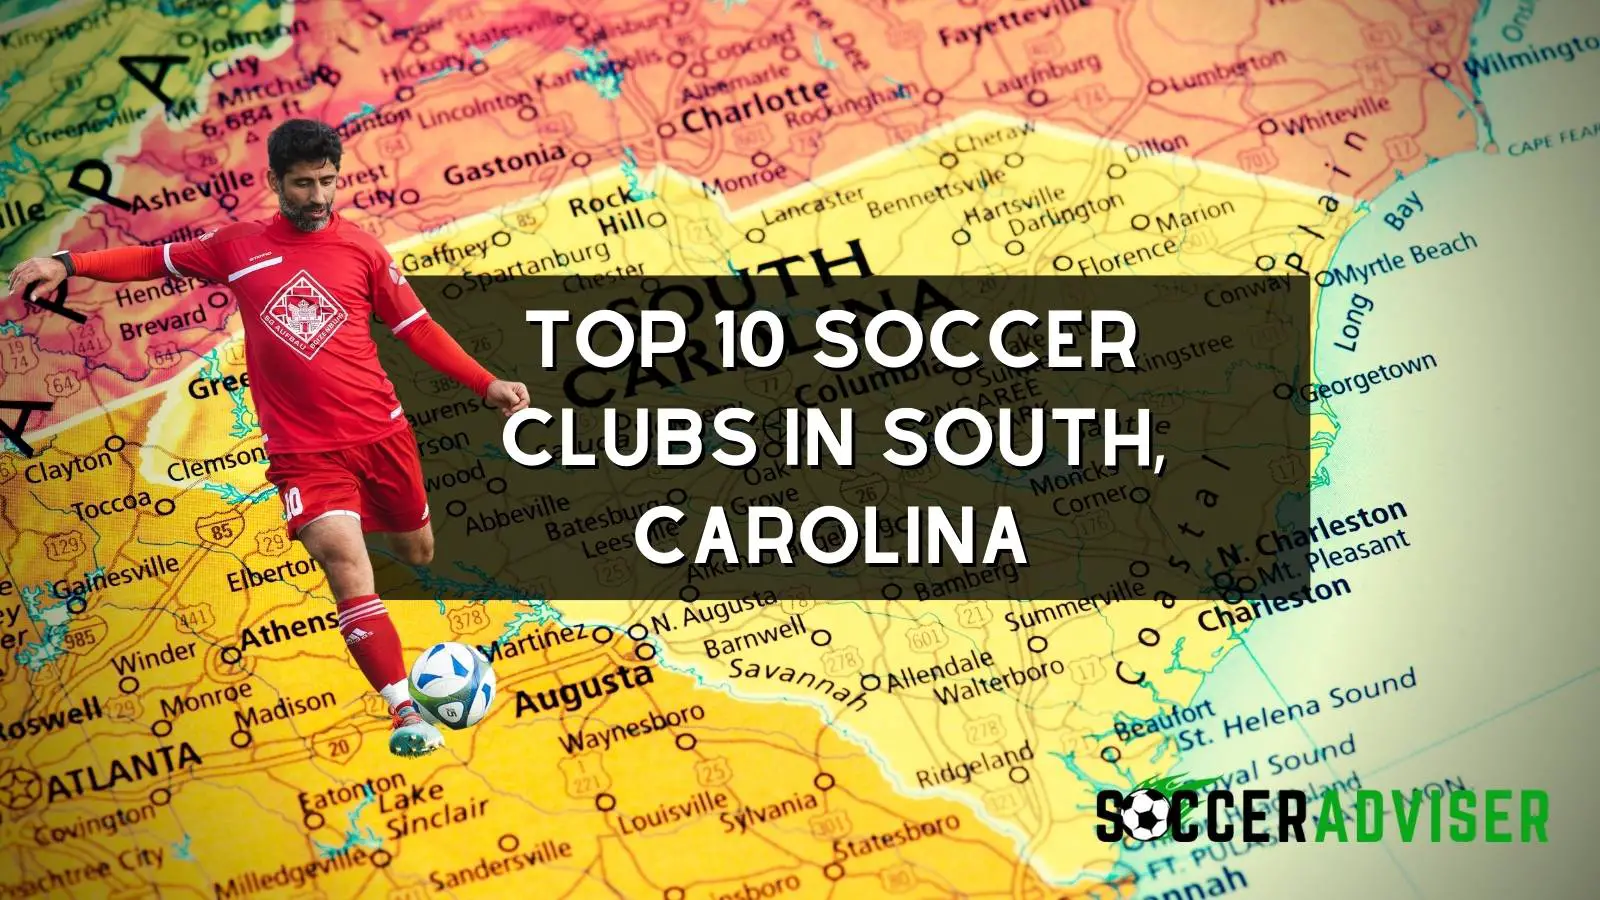 Top 10 Soccer Clubs in South Carolina (Youth Academies) for 2022